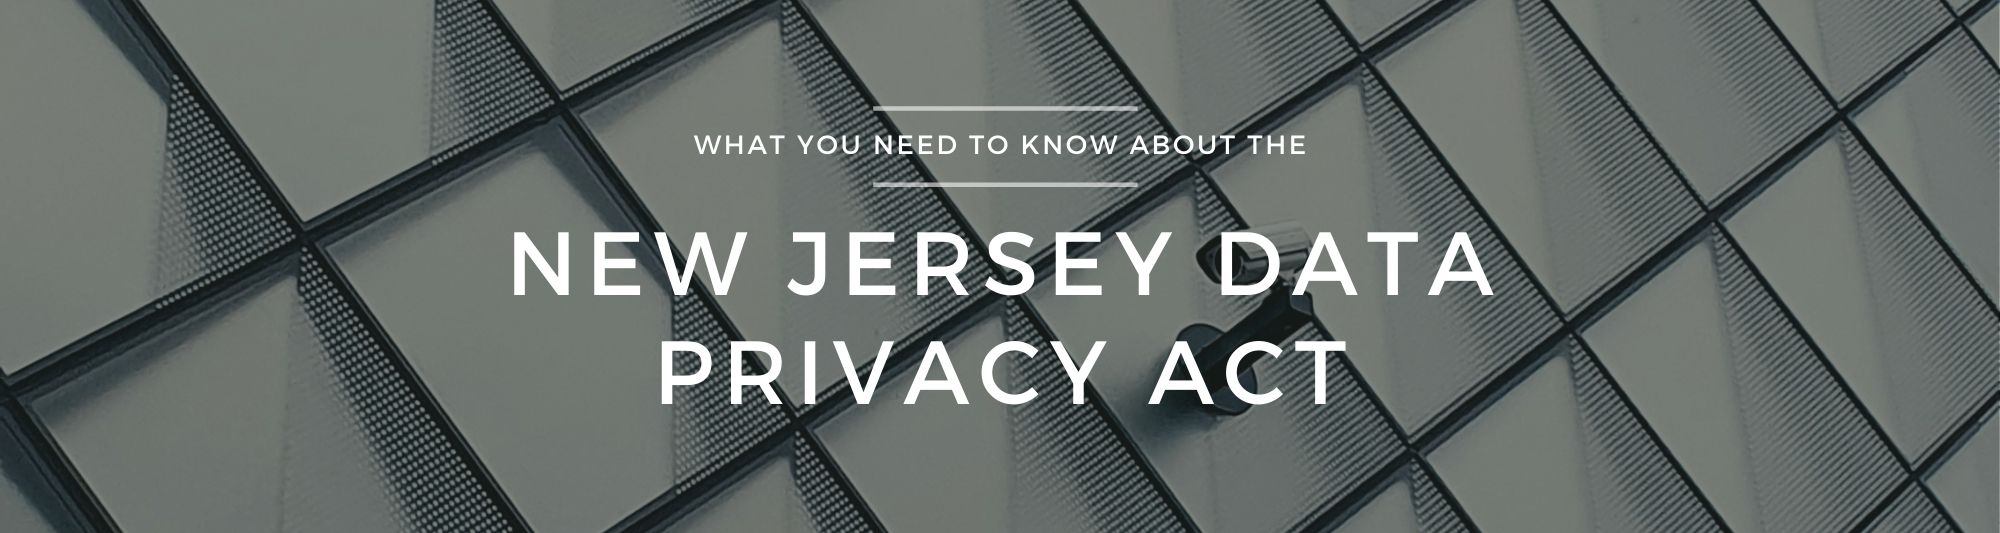 New Jersey Data Privacy Law Image